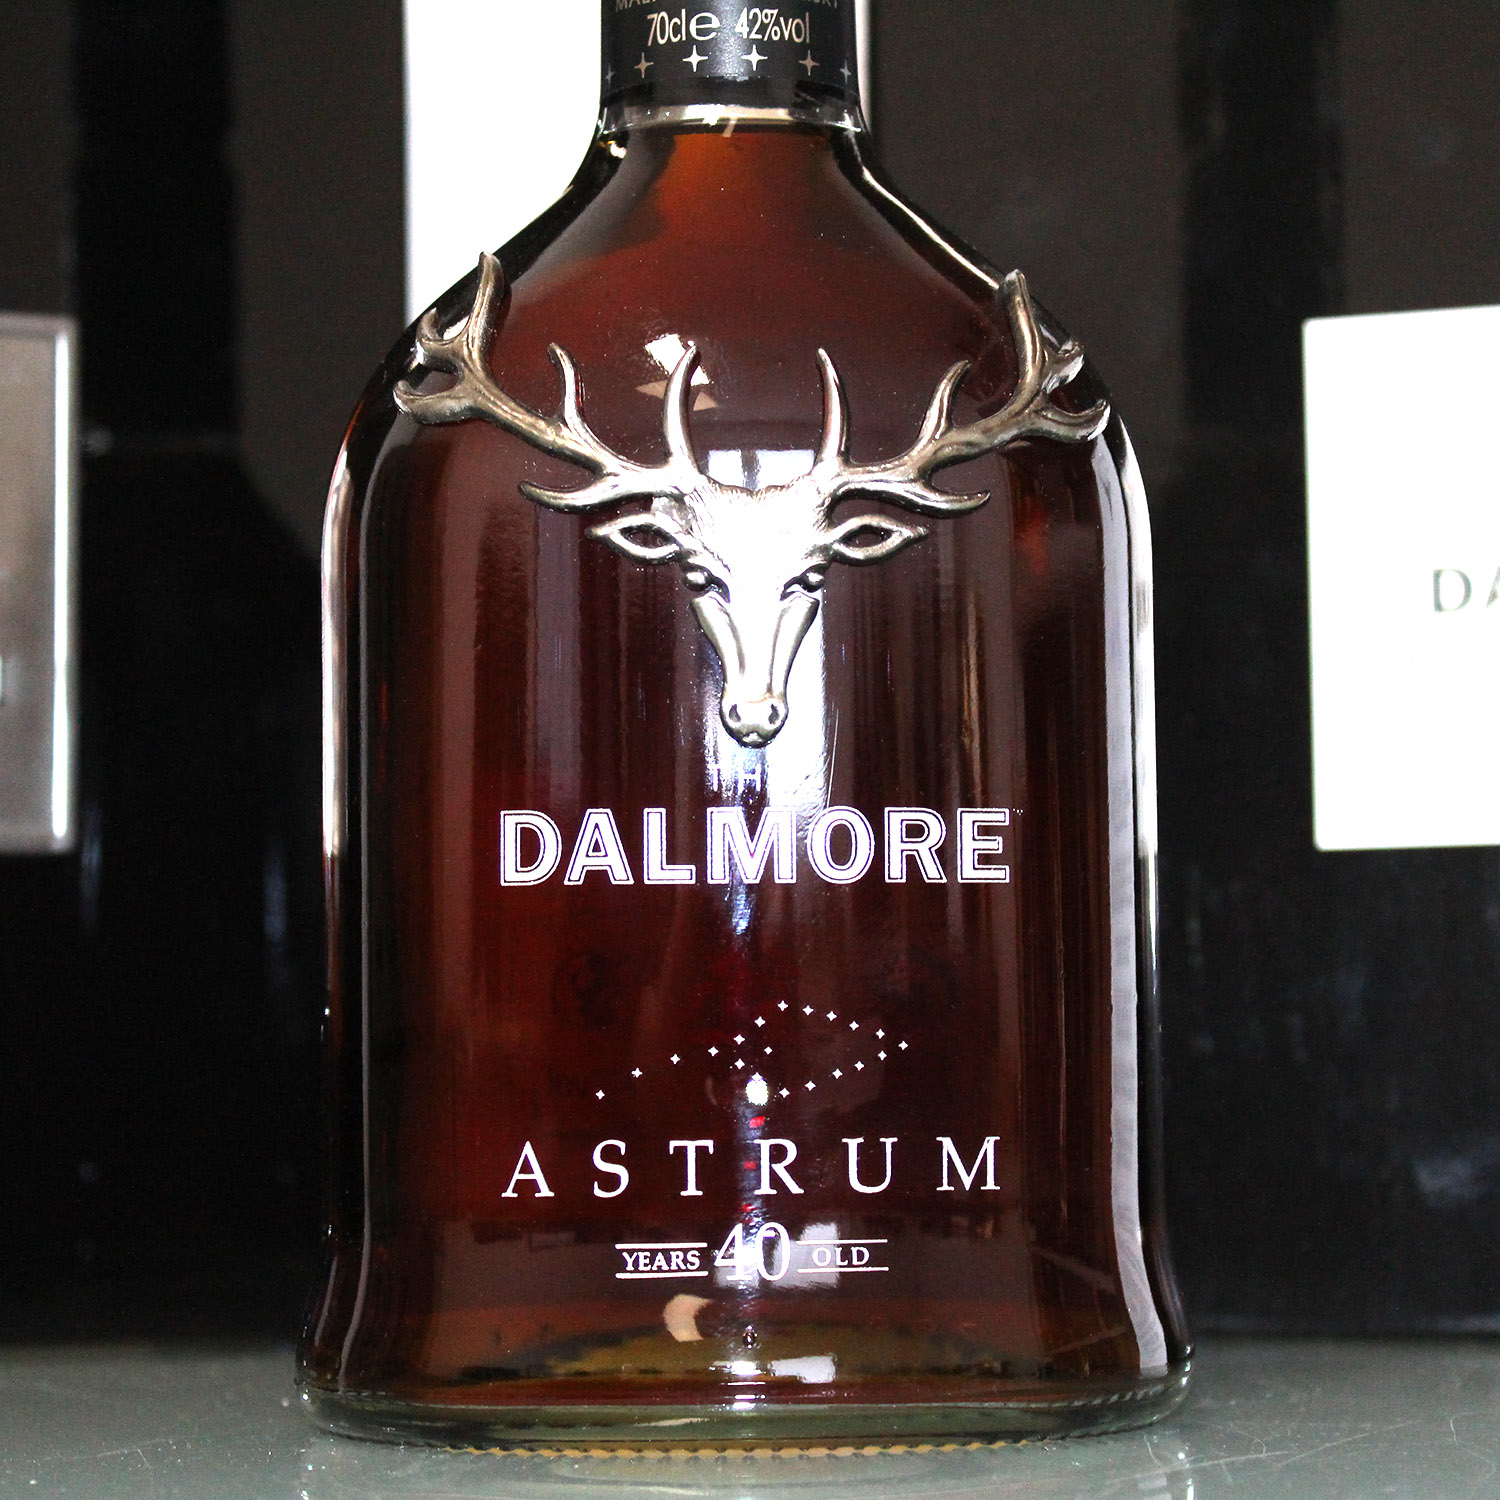 Dalmore 1966 40 Year Old Astrum Whisky Label